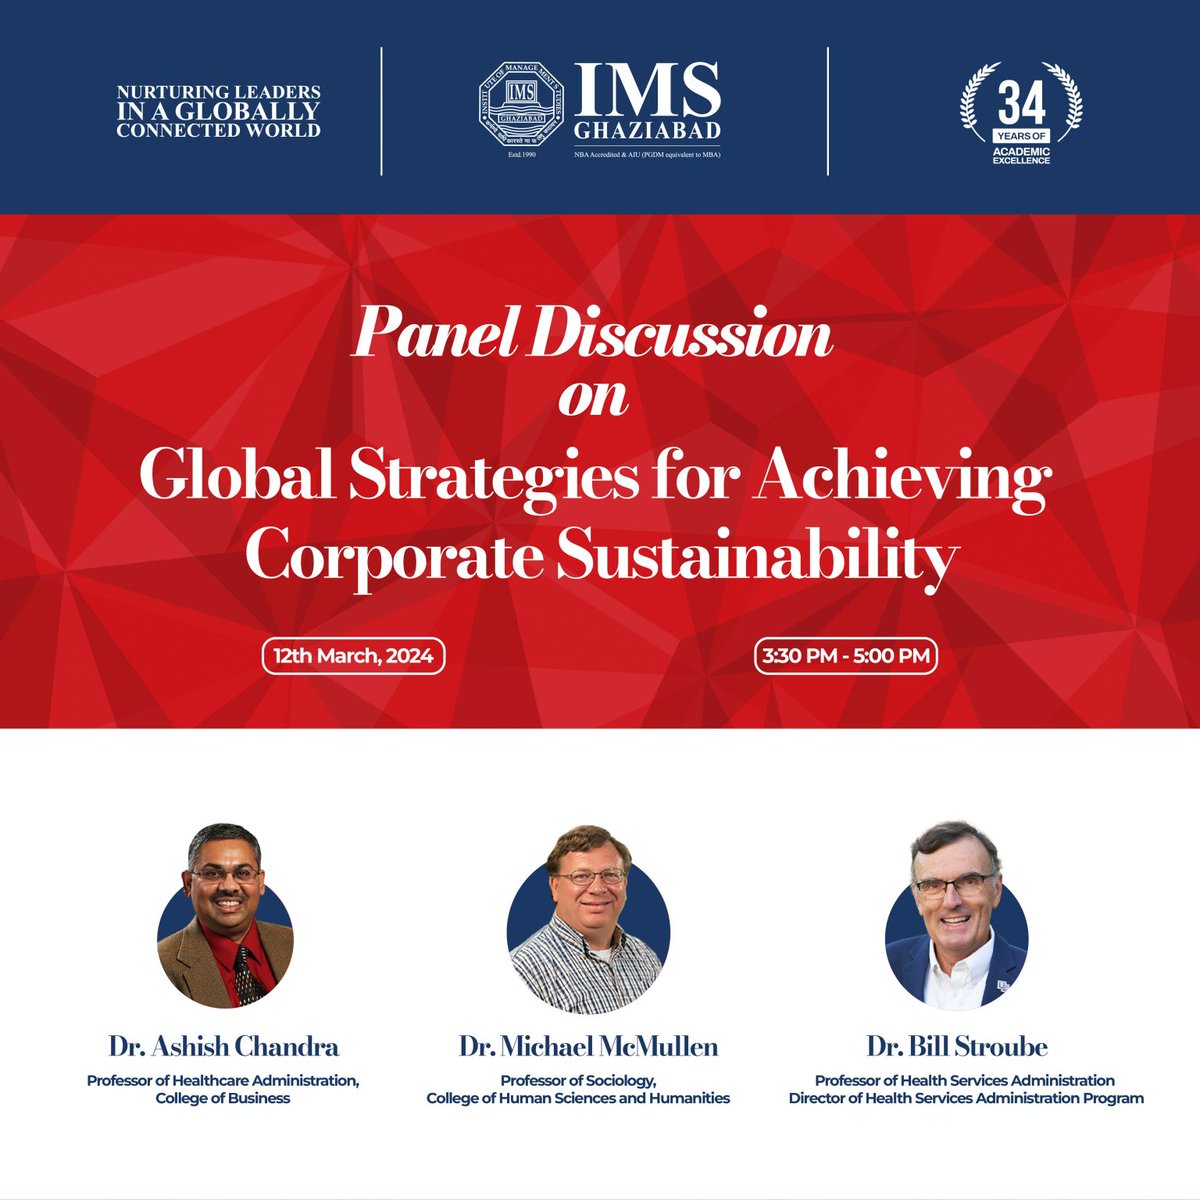 Join us for a Panel Discussion on 'Global Strategies for Corporate Sustainability.' Witness a broadened perspective on the challenges and opportunities in the corporate sustainability landscape. Save the date: March 12, 2024 3:30 PM - 5:00 PM #GlobalInsights #PanelDiscussion